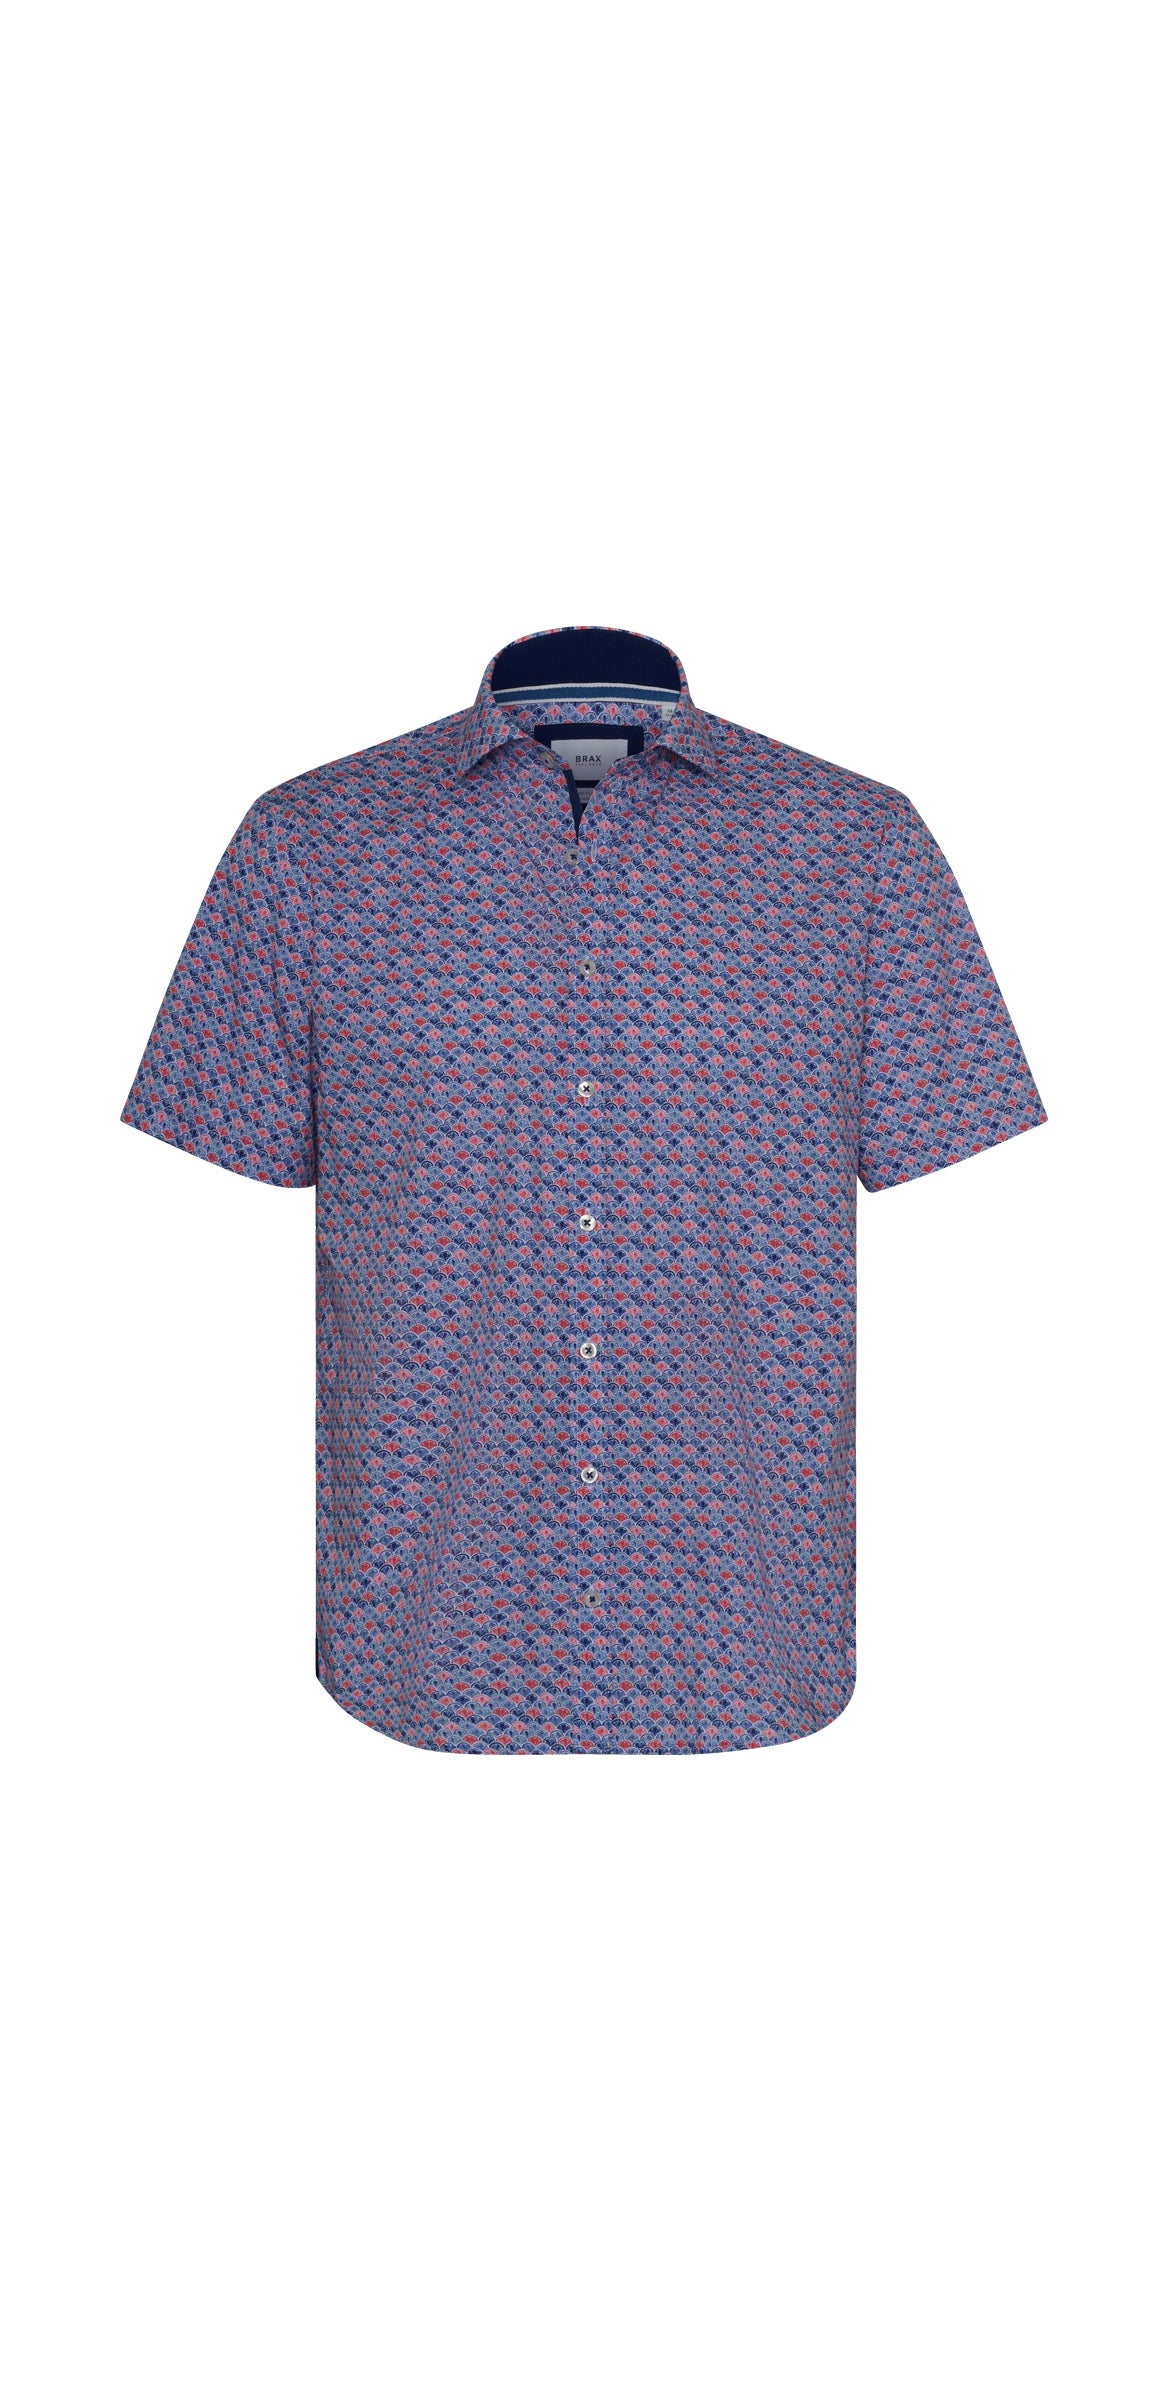 Hardy P Hi Flex Print SS Shirt in Red and Blue